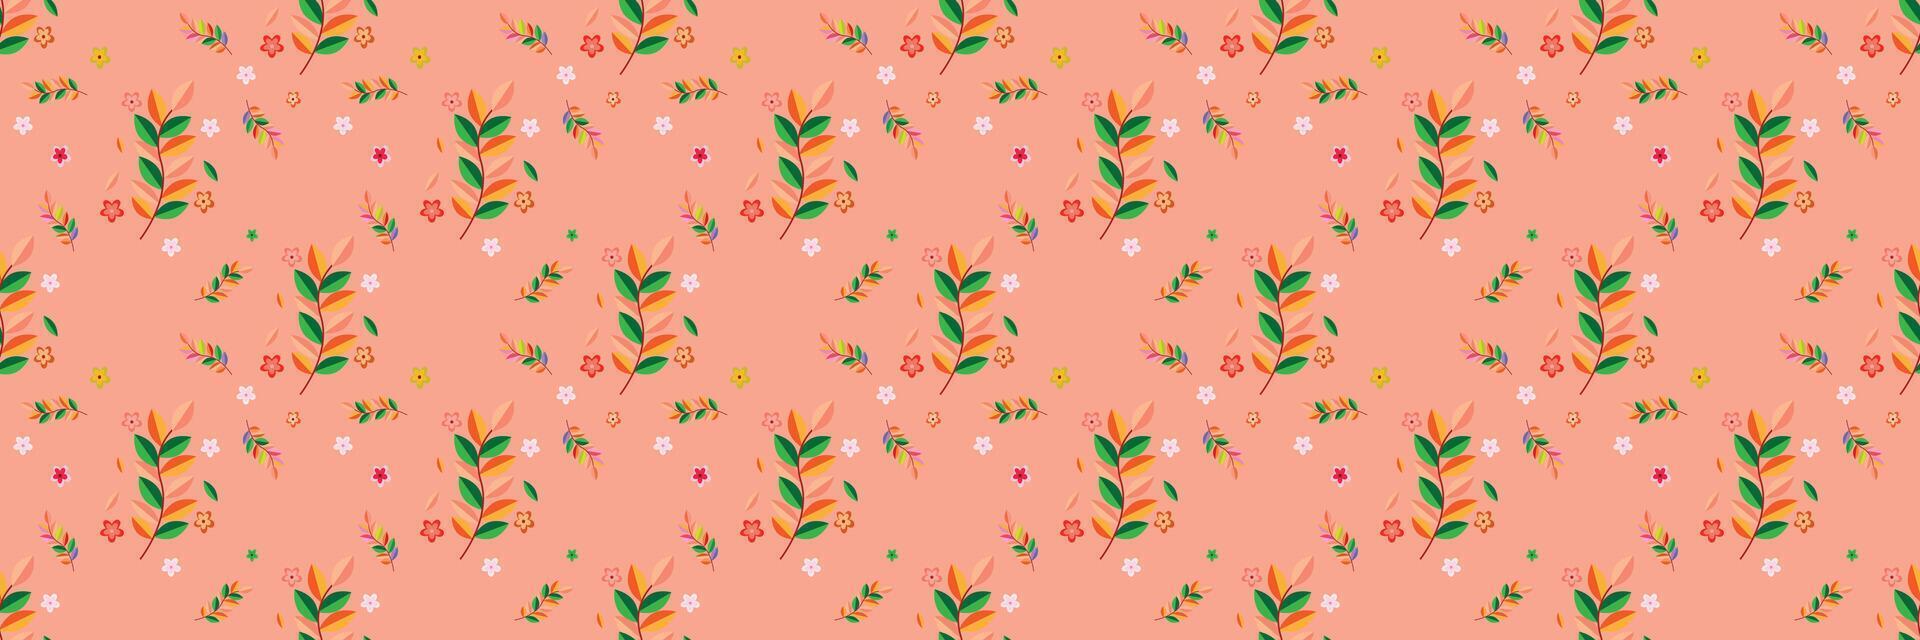 floral colourful pattern design vector